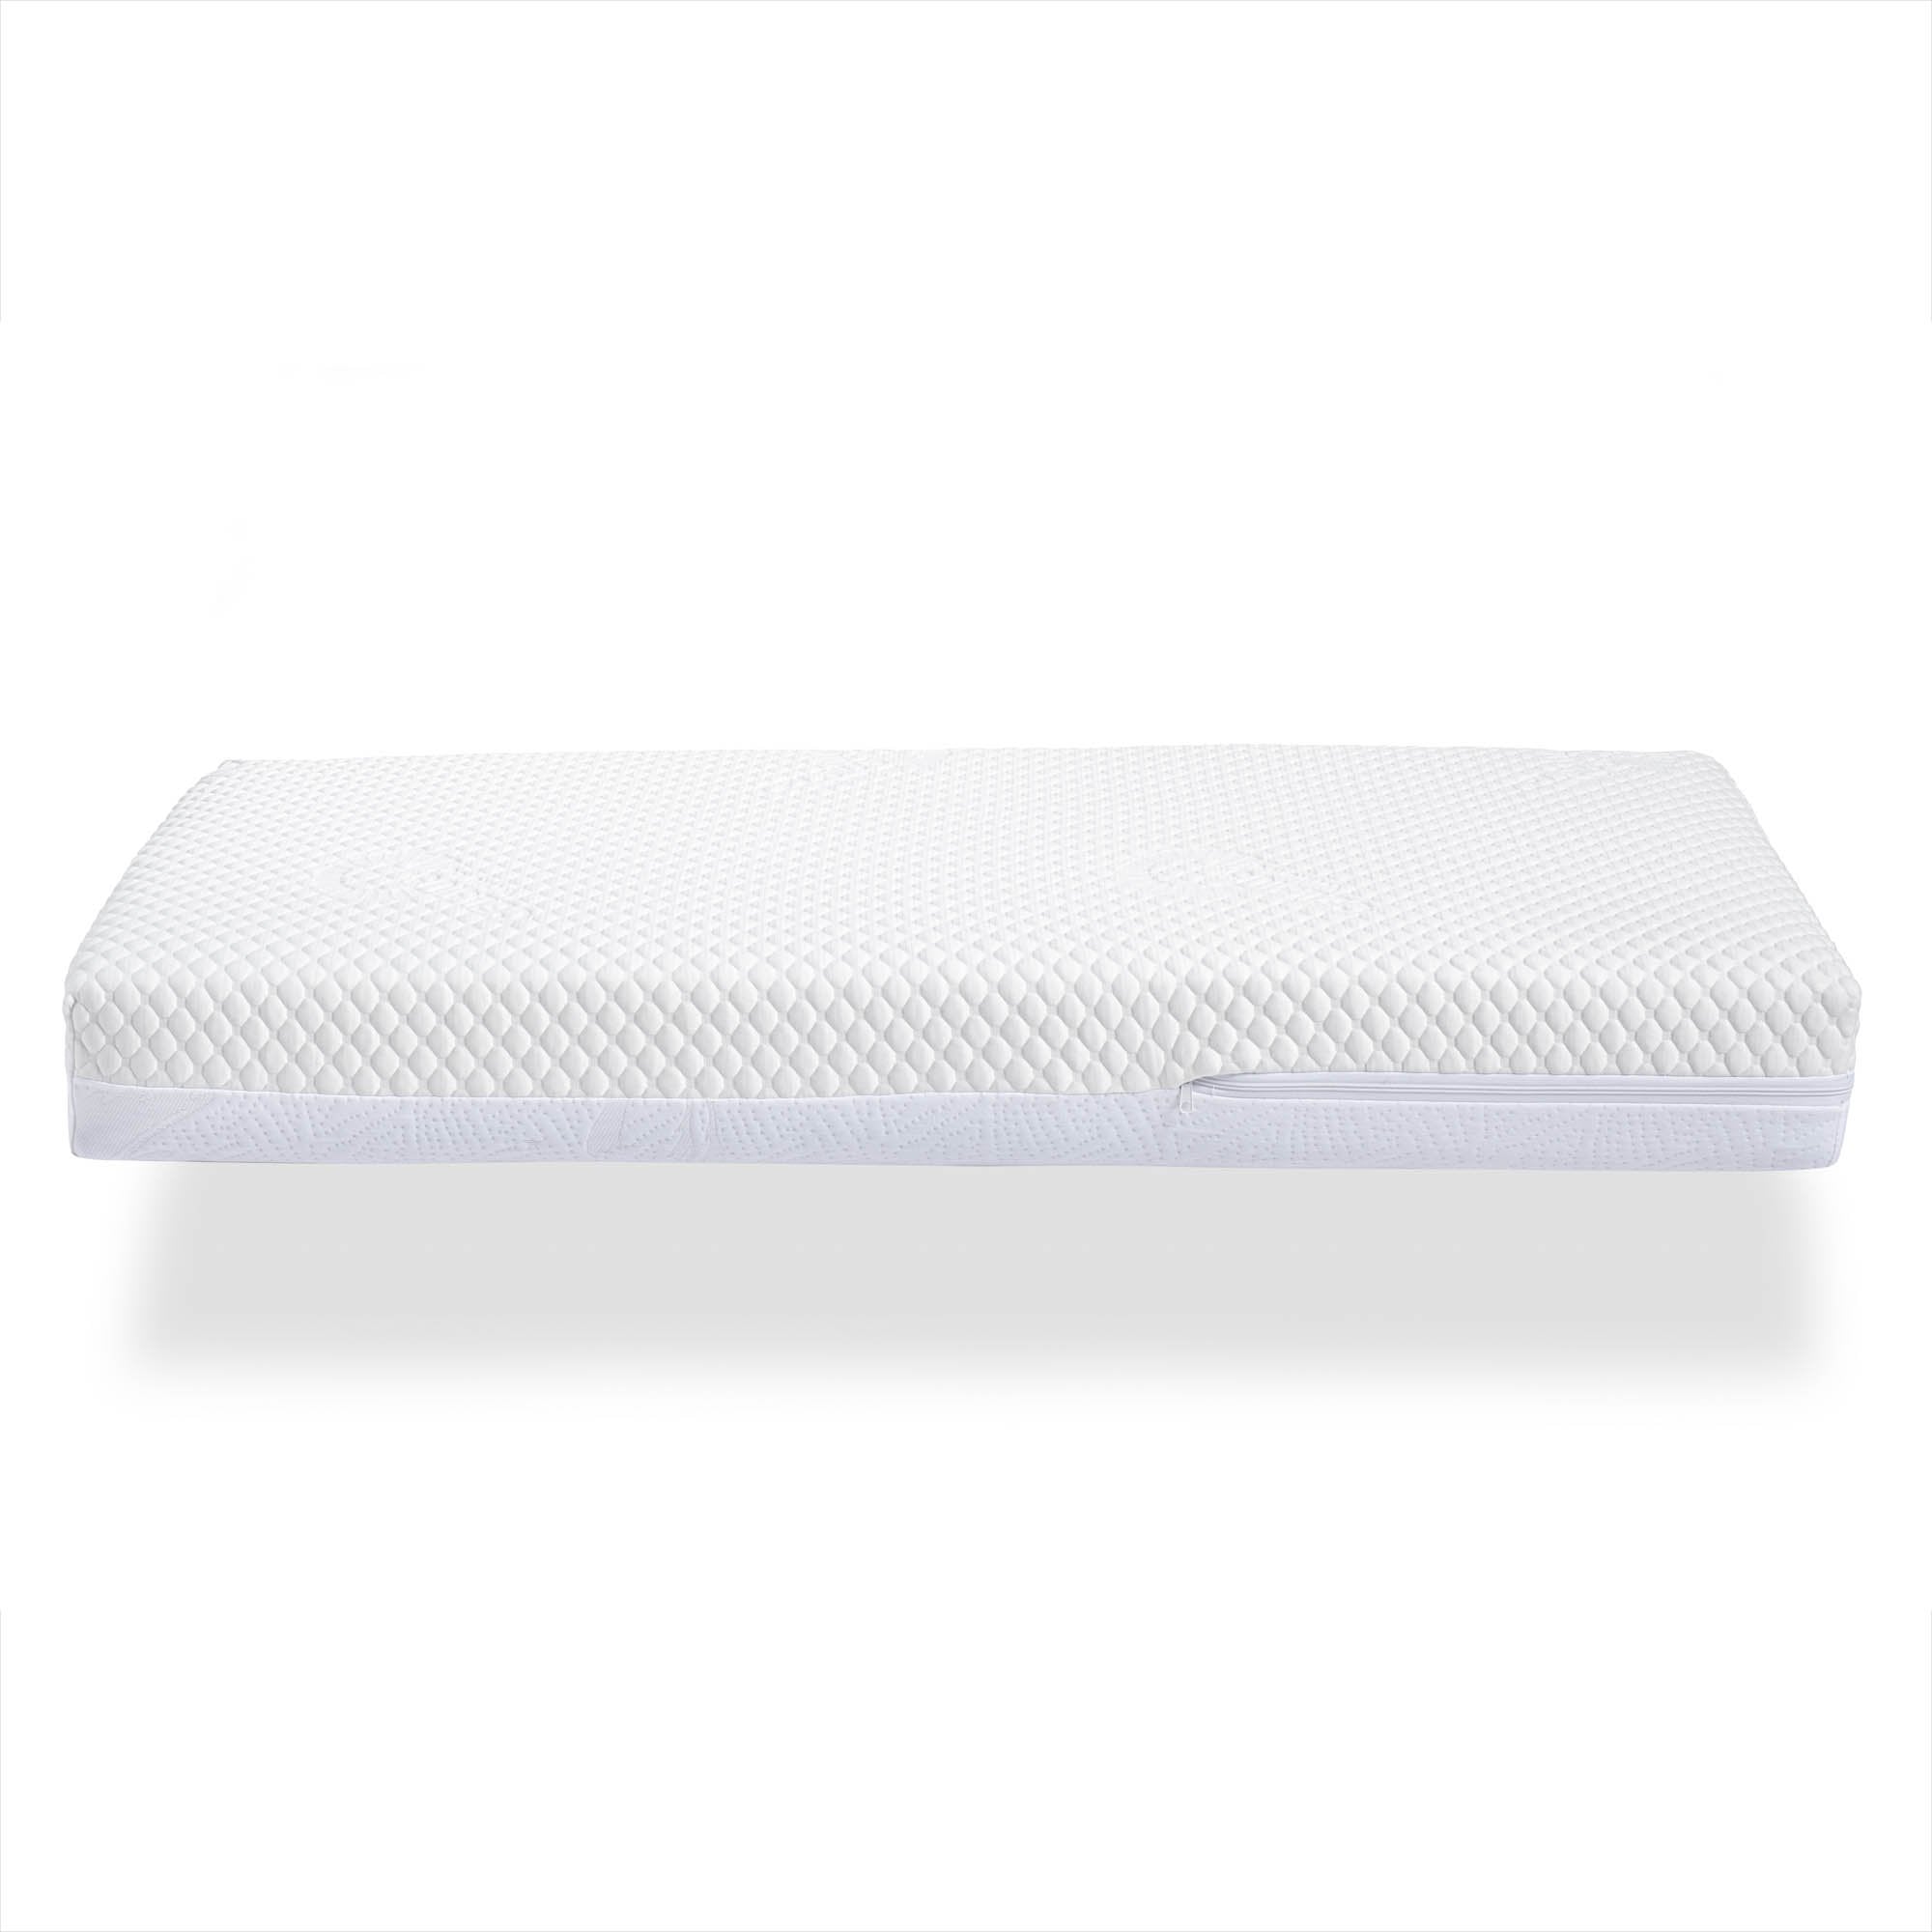 2-Stage Cooling, Organic & Breathable Crib Mattress